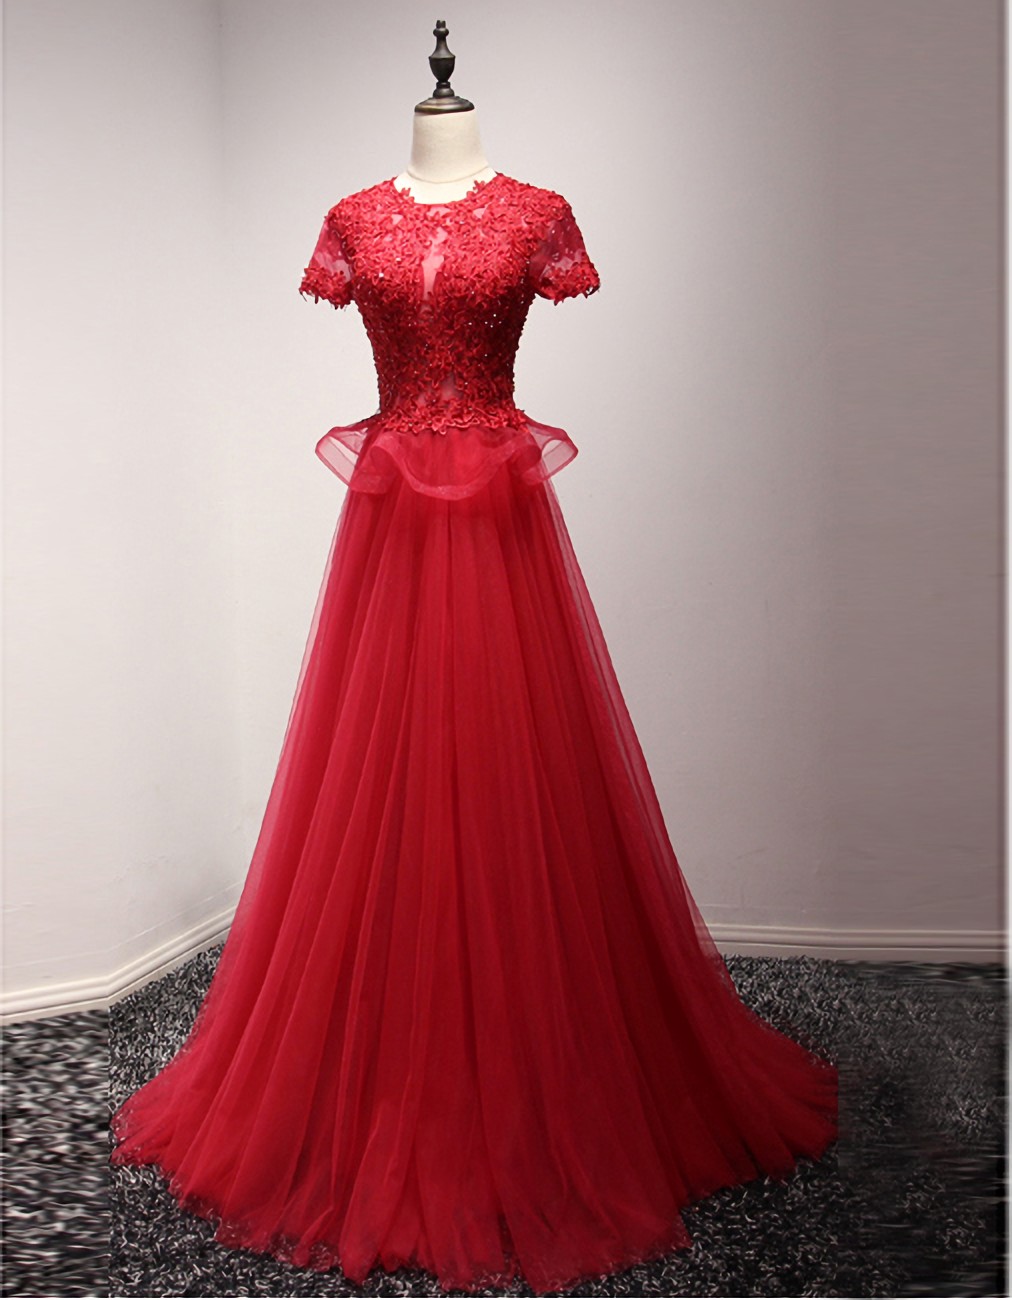 Elegant O Neck Tulle Formal Prom Dress, Beautiful Long Prom Dress, Banquet Party Dress